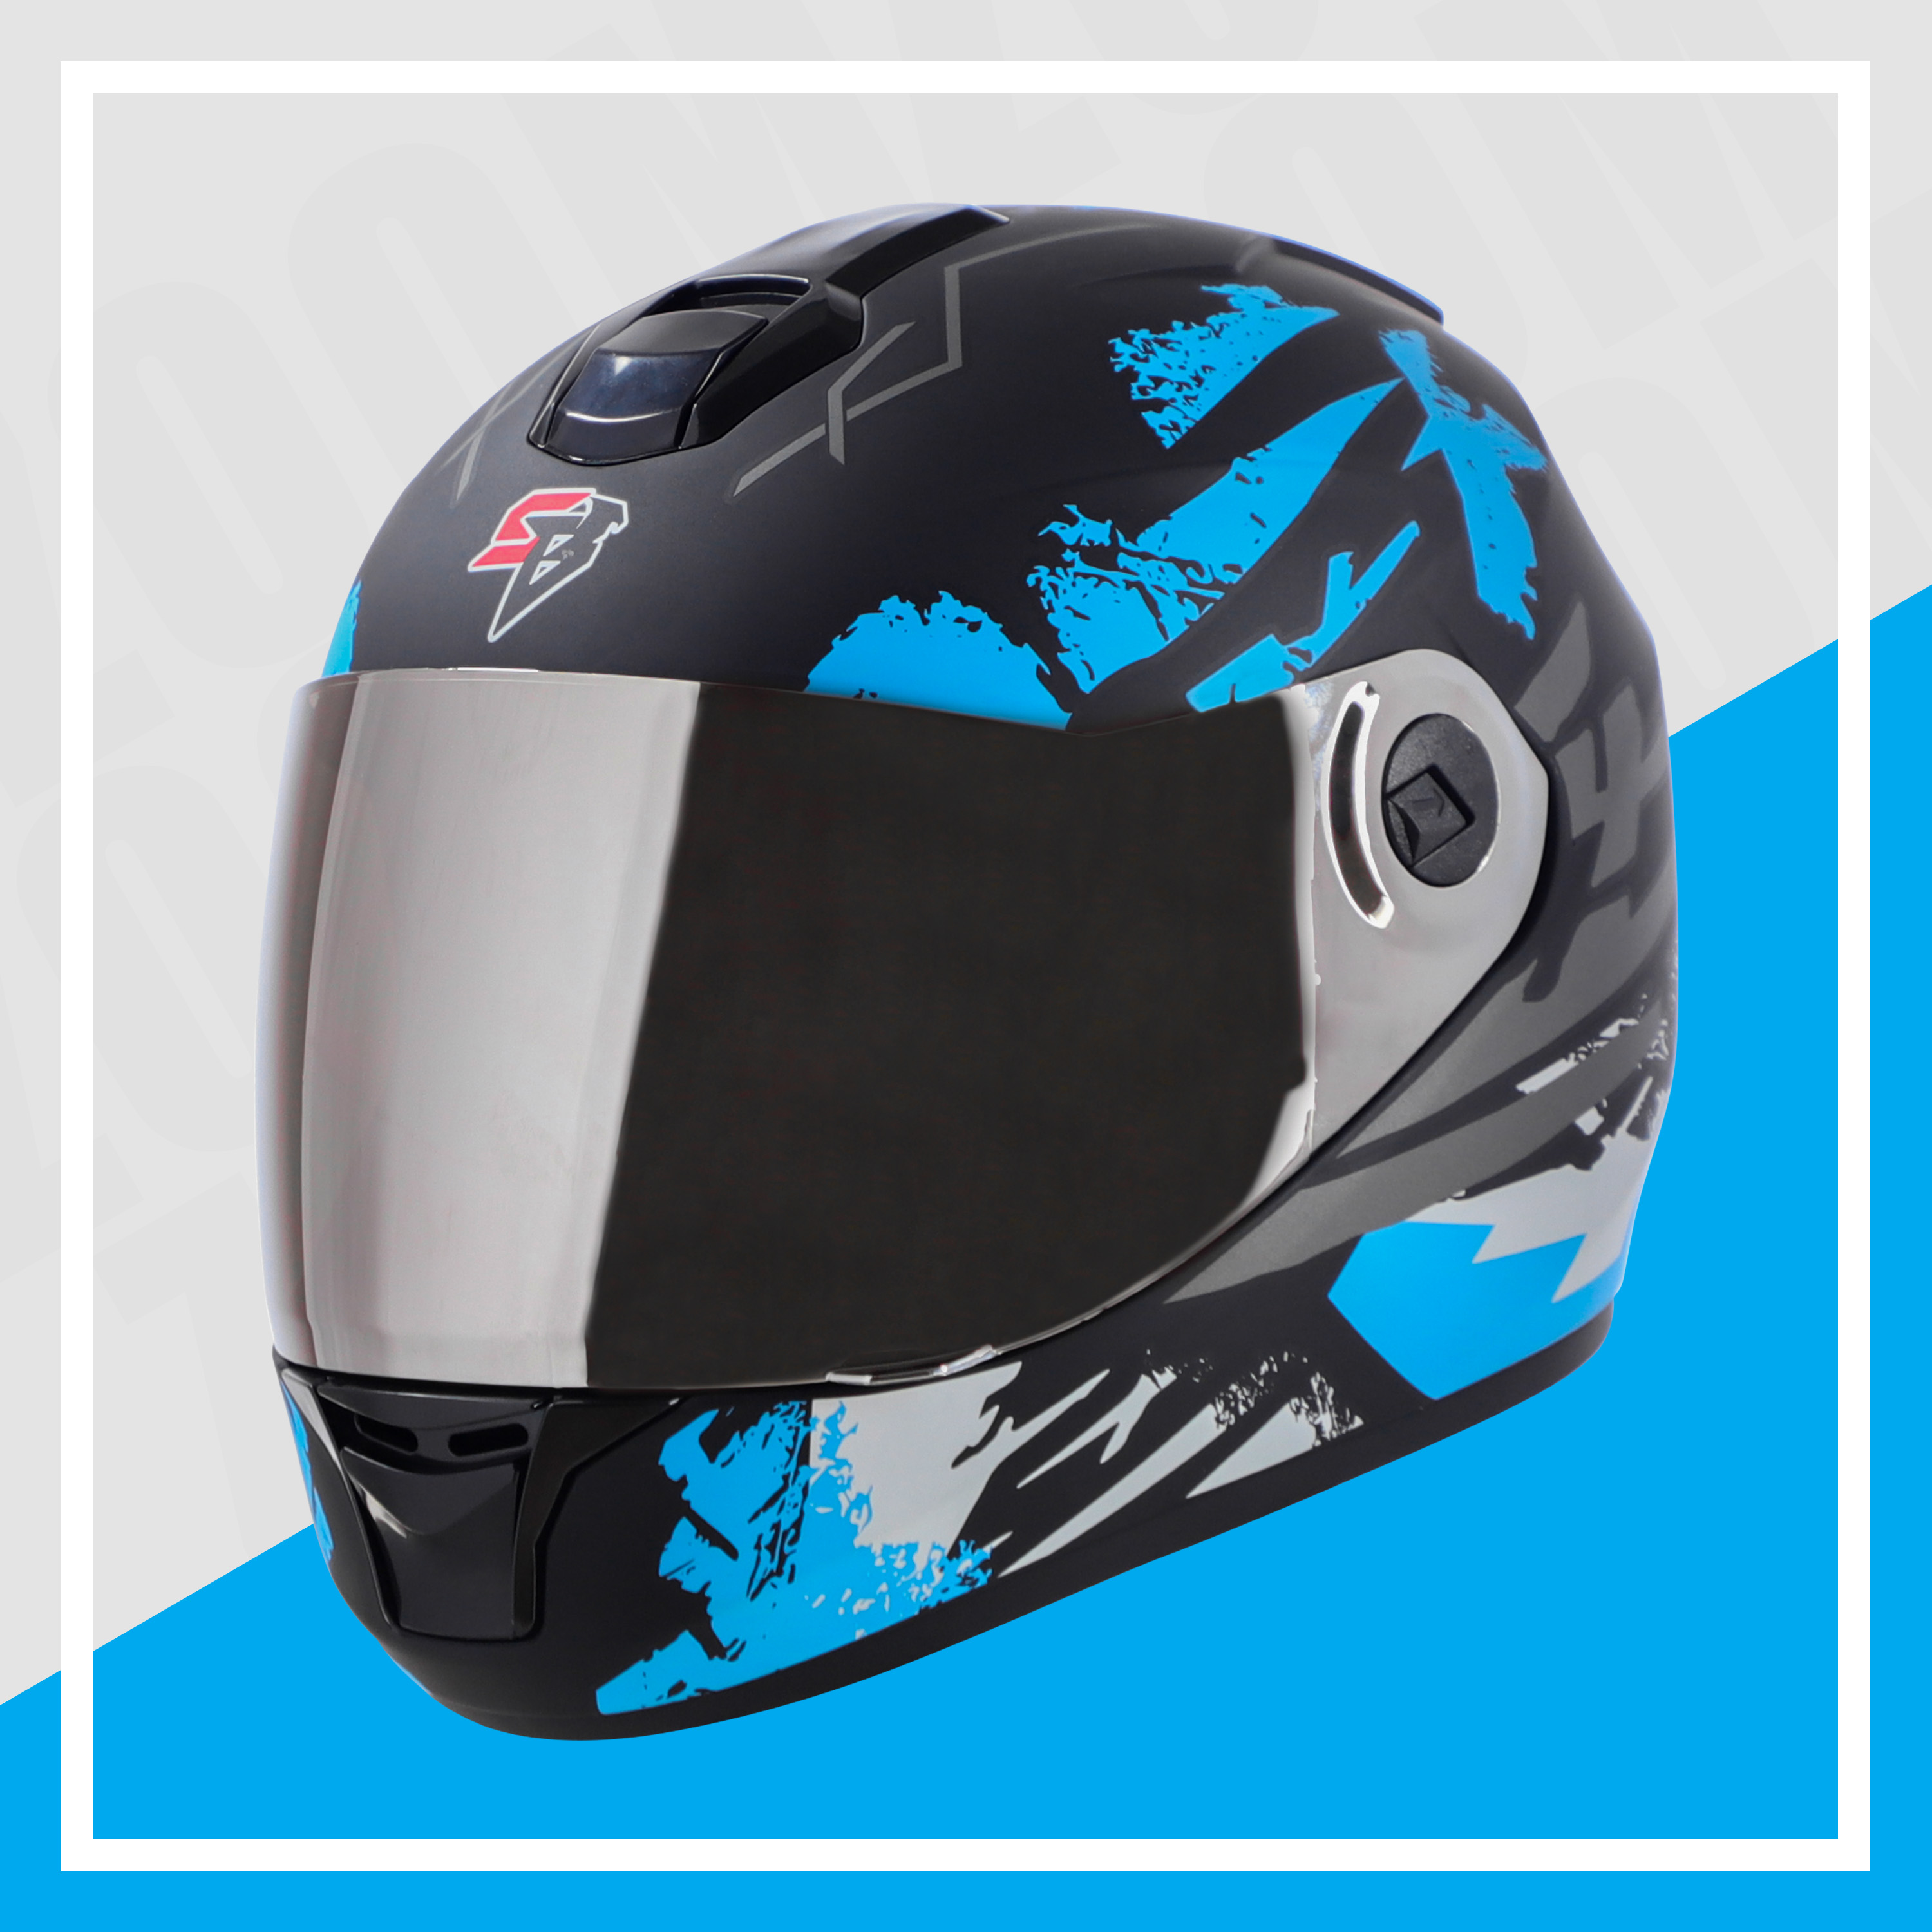 Steelbird SBH-11 Zoom Racer ISI Certified Full Face Graphic Helmet For Men And Women (Glossy Black Jazz Blue With Chrome Silver Visor)